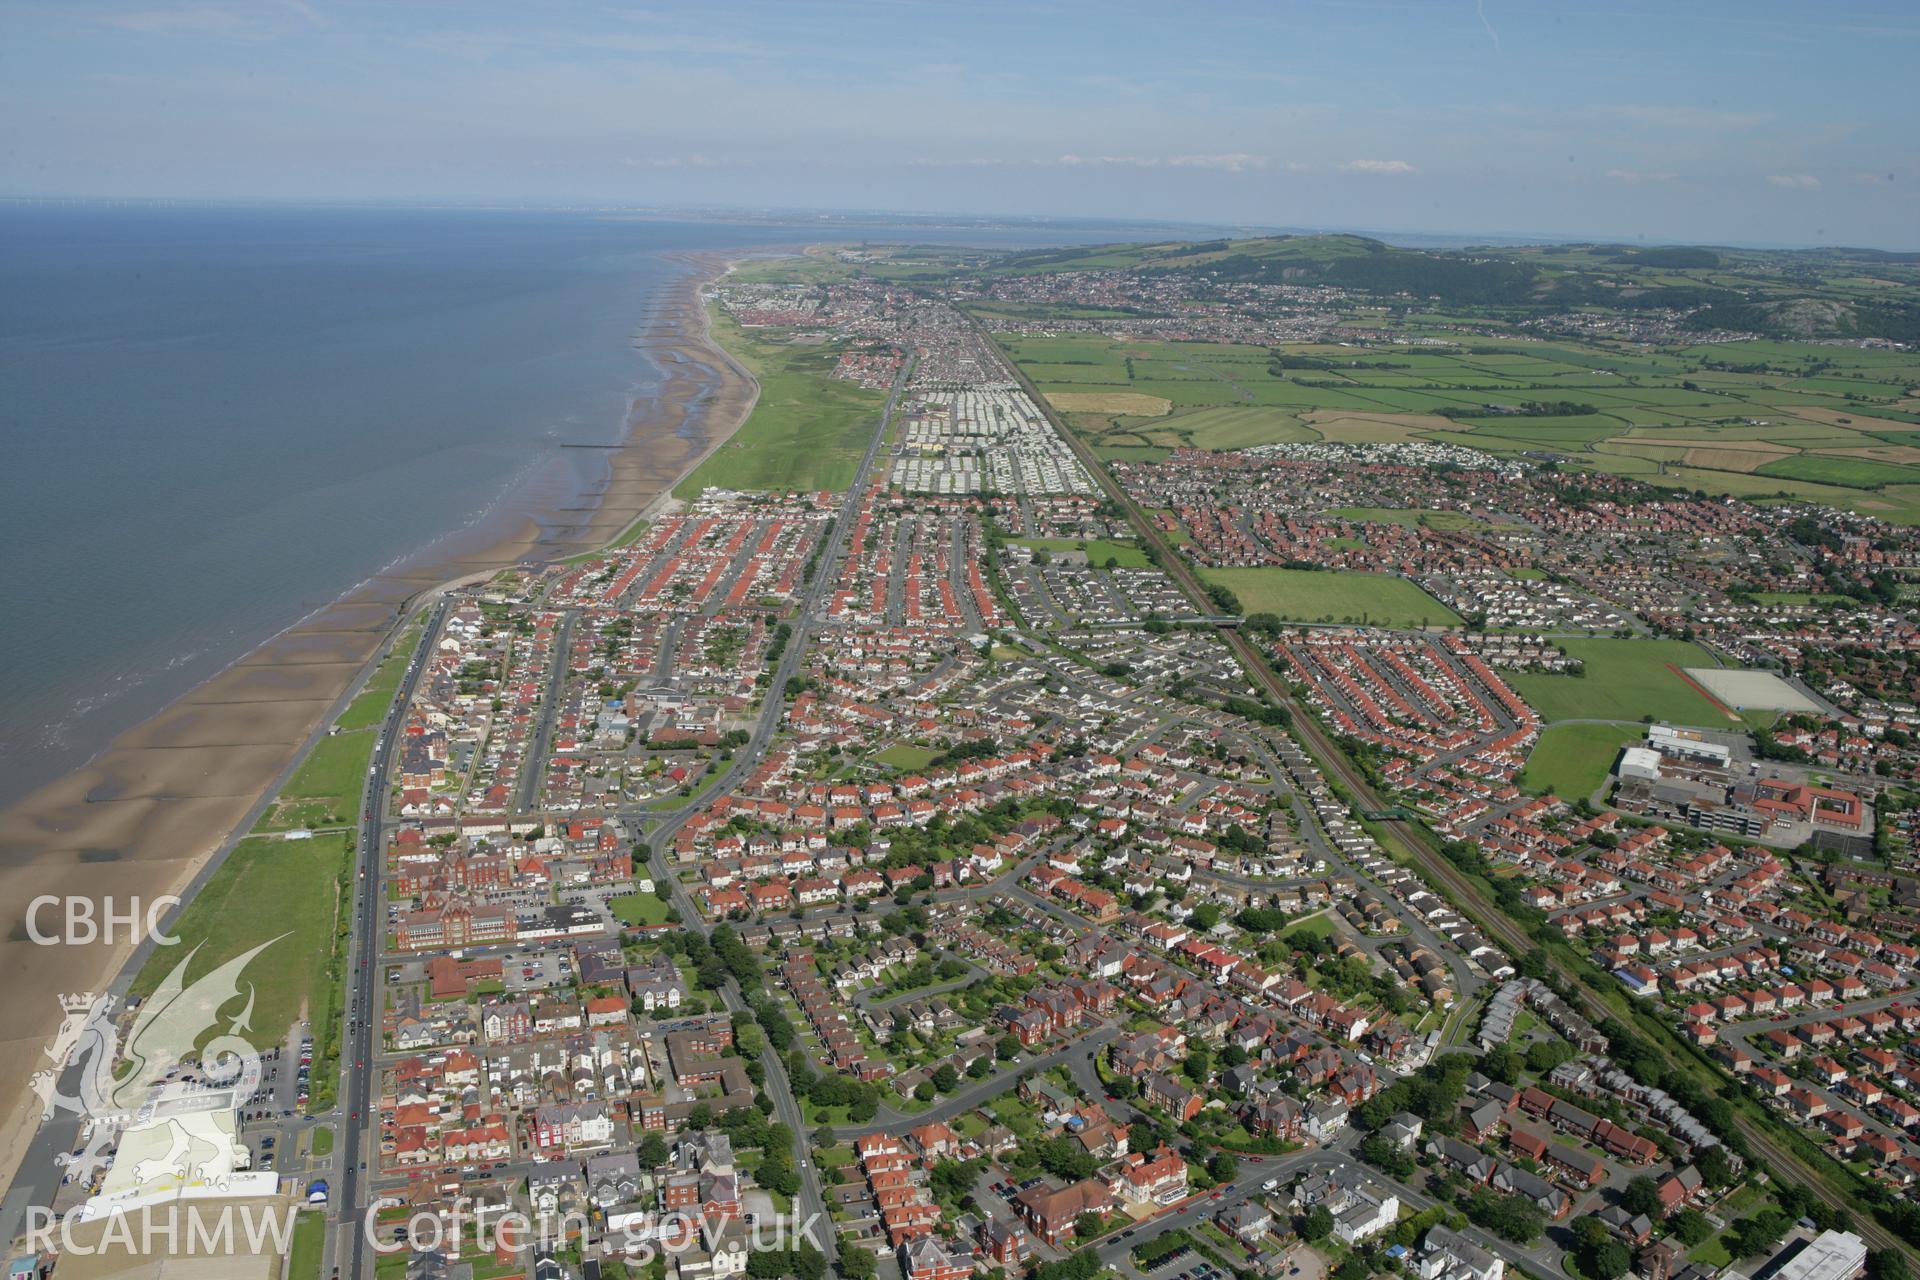 RCAHMW colour oblique aerial photograph of Rhyl looking north-east. Taken on 31 July 2007 by Toby Driver